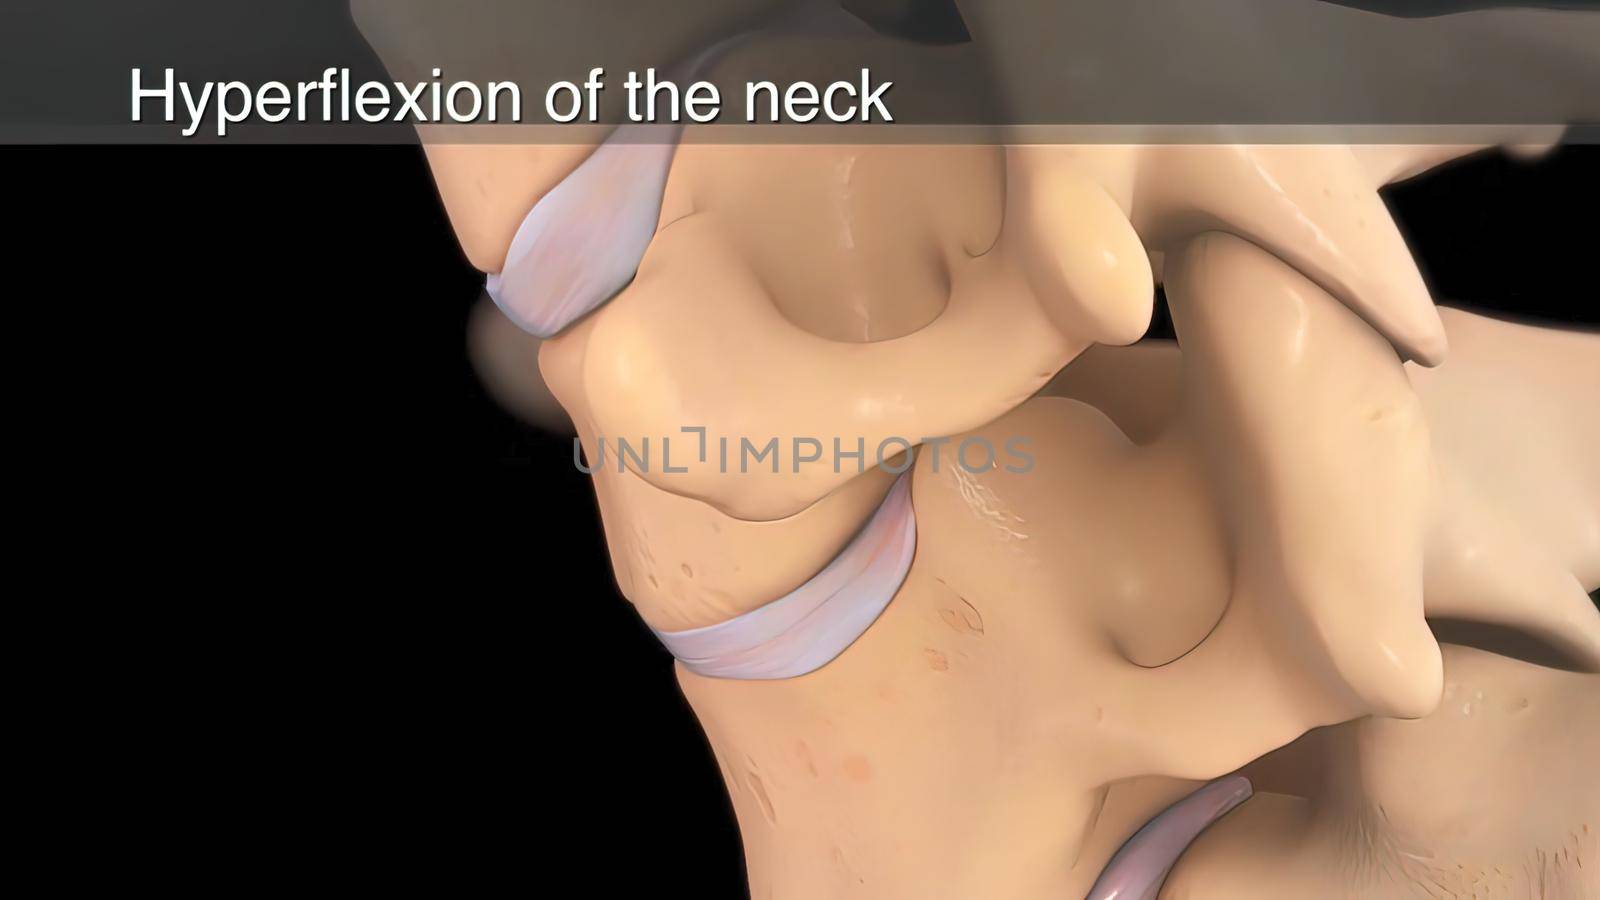 hyperflexion of the neck 3d by creativepic